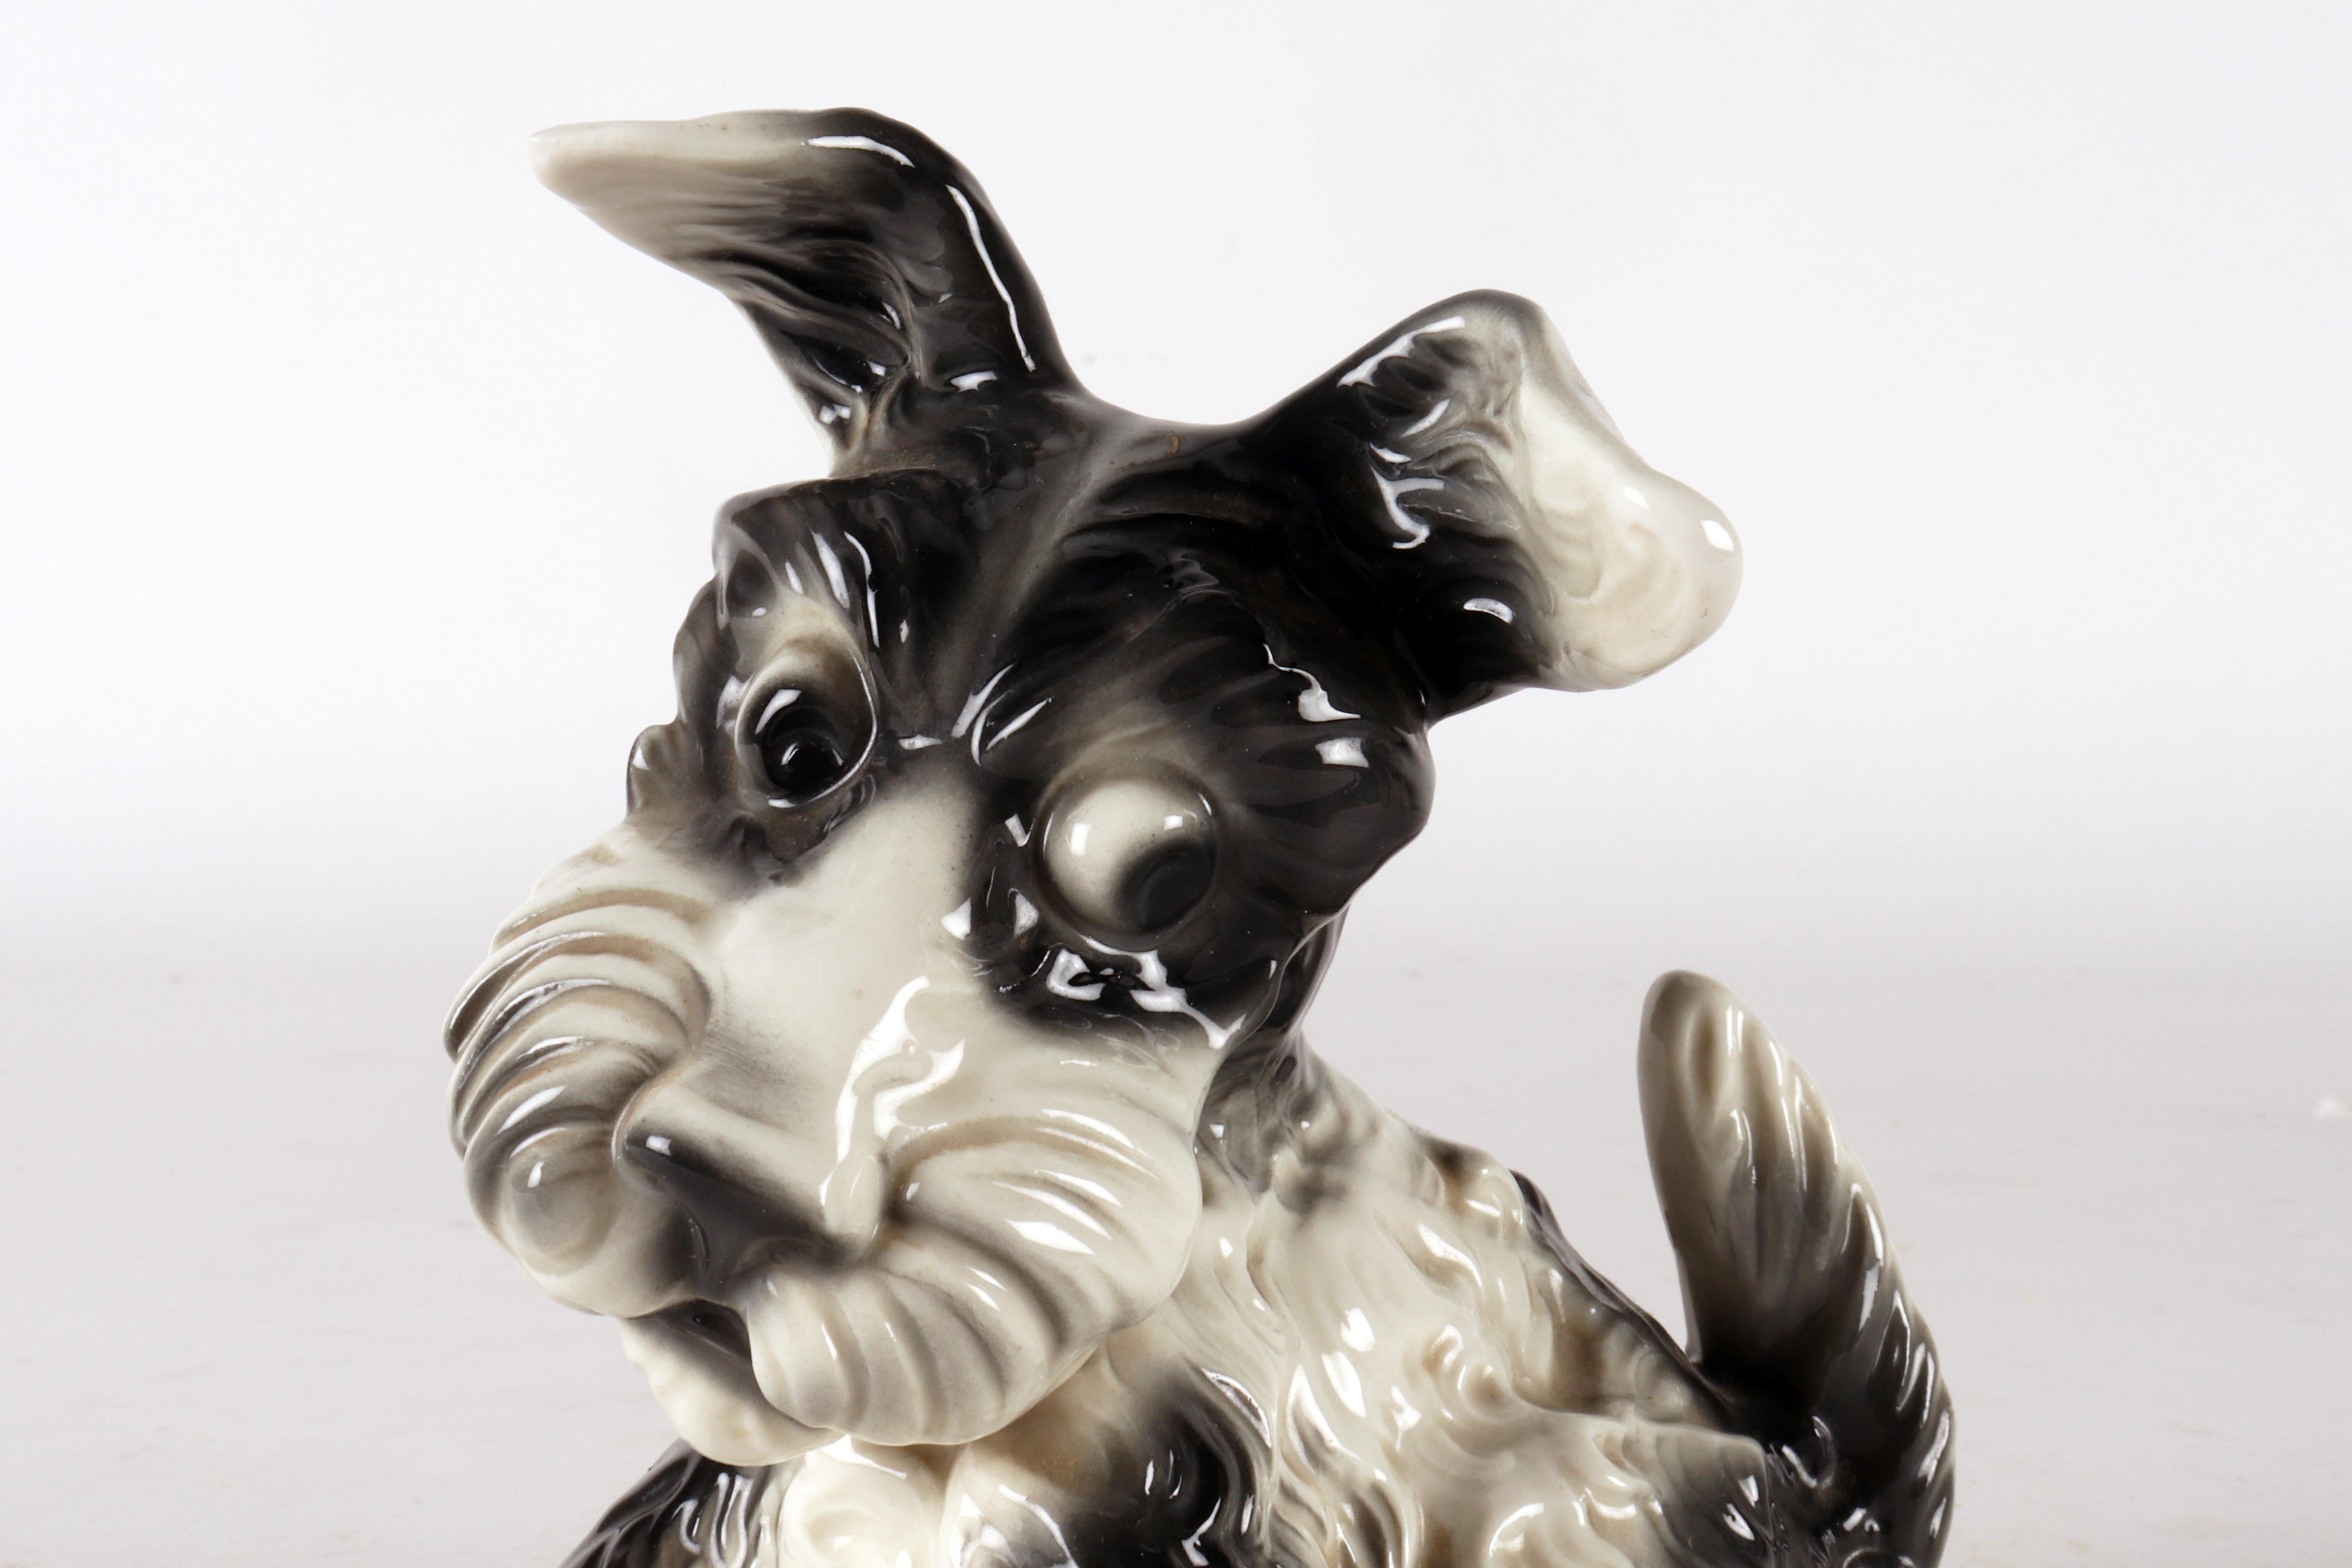 Porcelain sculpture of a Terrier dog, England Thuringia, Germany, 1940 - 1950. For Sale 3